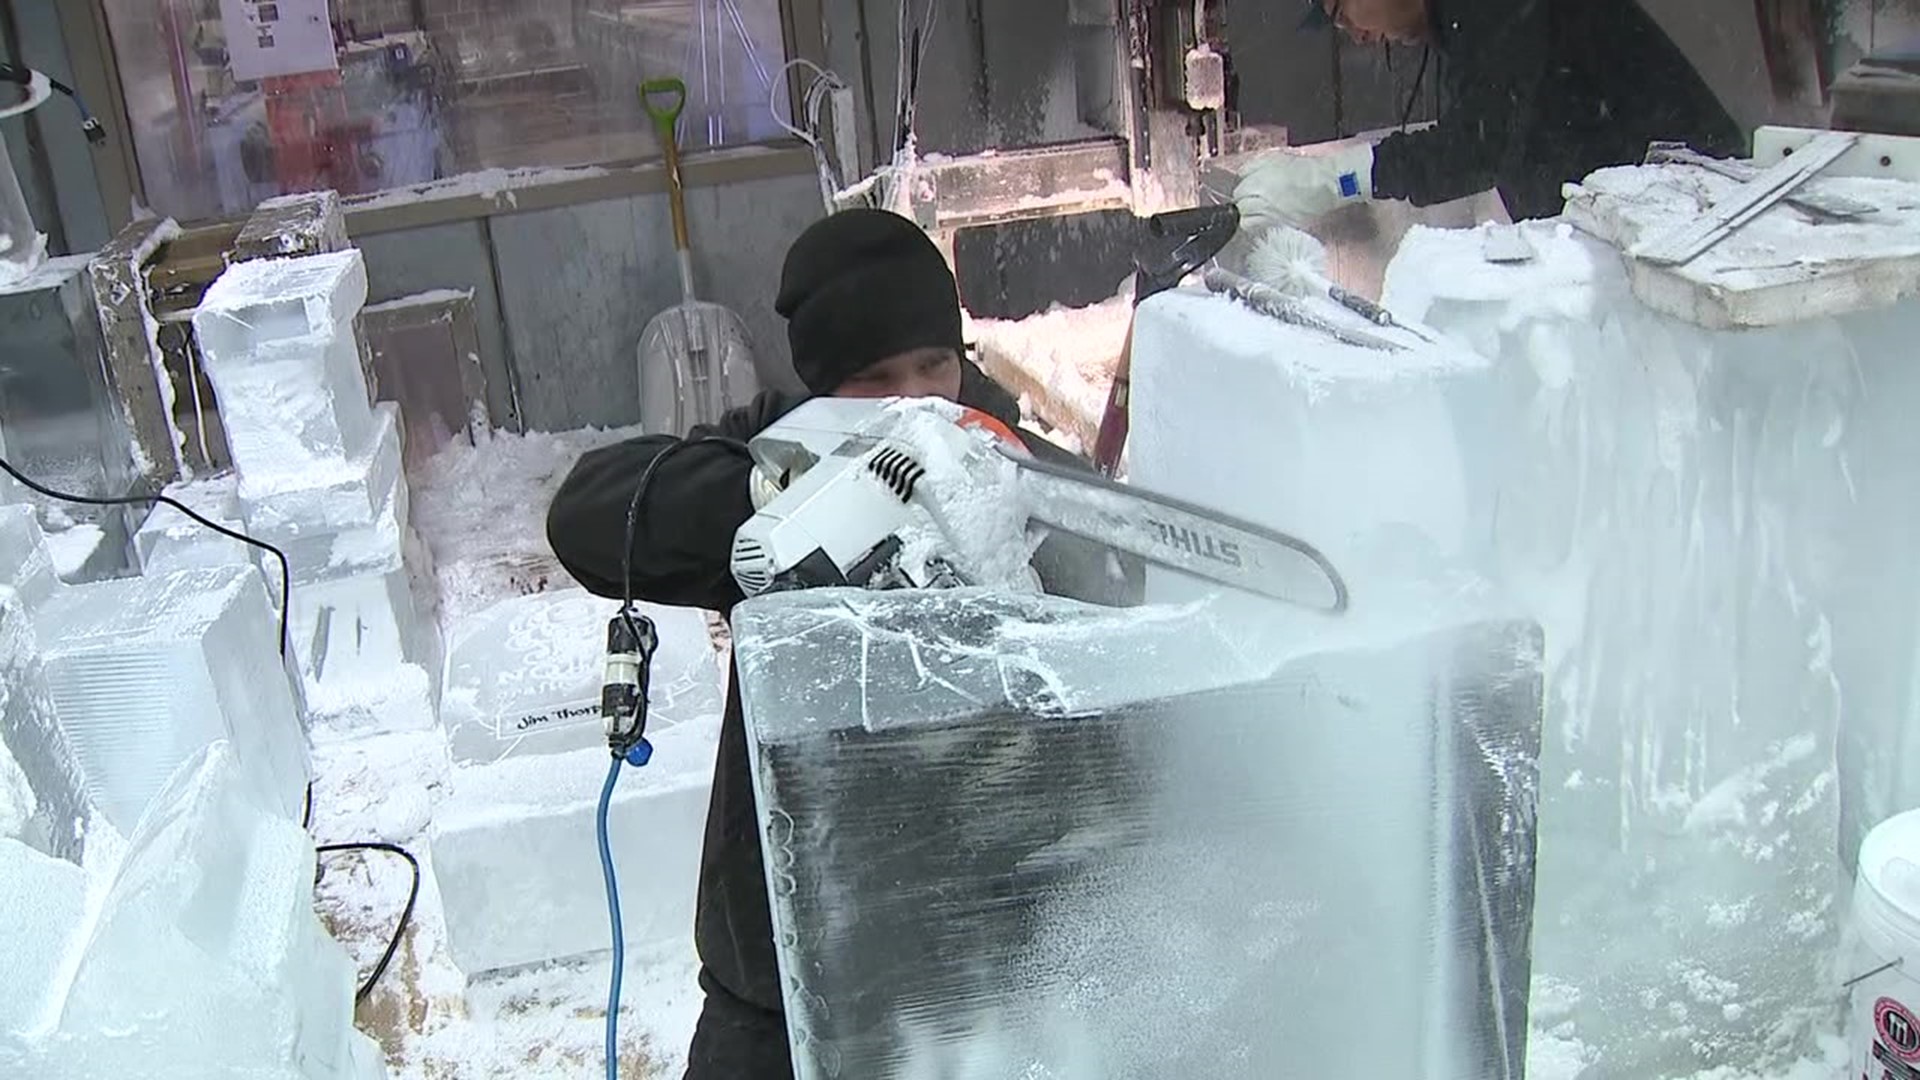 Sculpted Ice Works near Hawley is craving up more than 60 sculptures for Jim Thorpe and Stroudsburg's Winterfests.